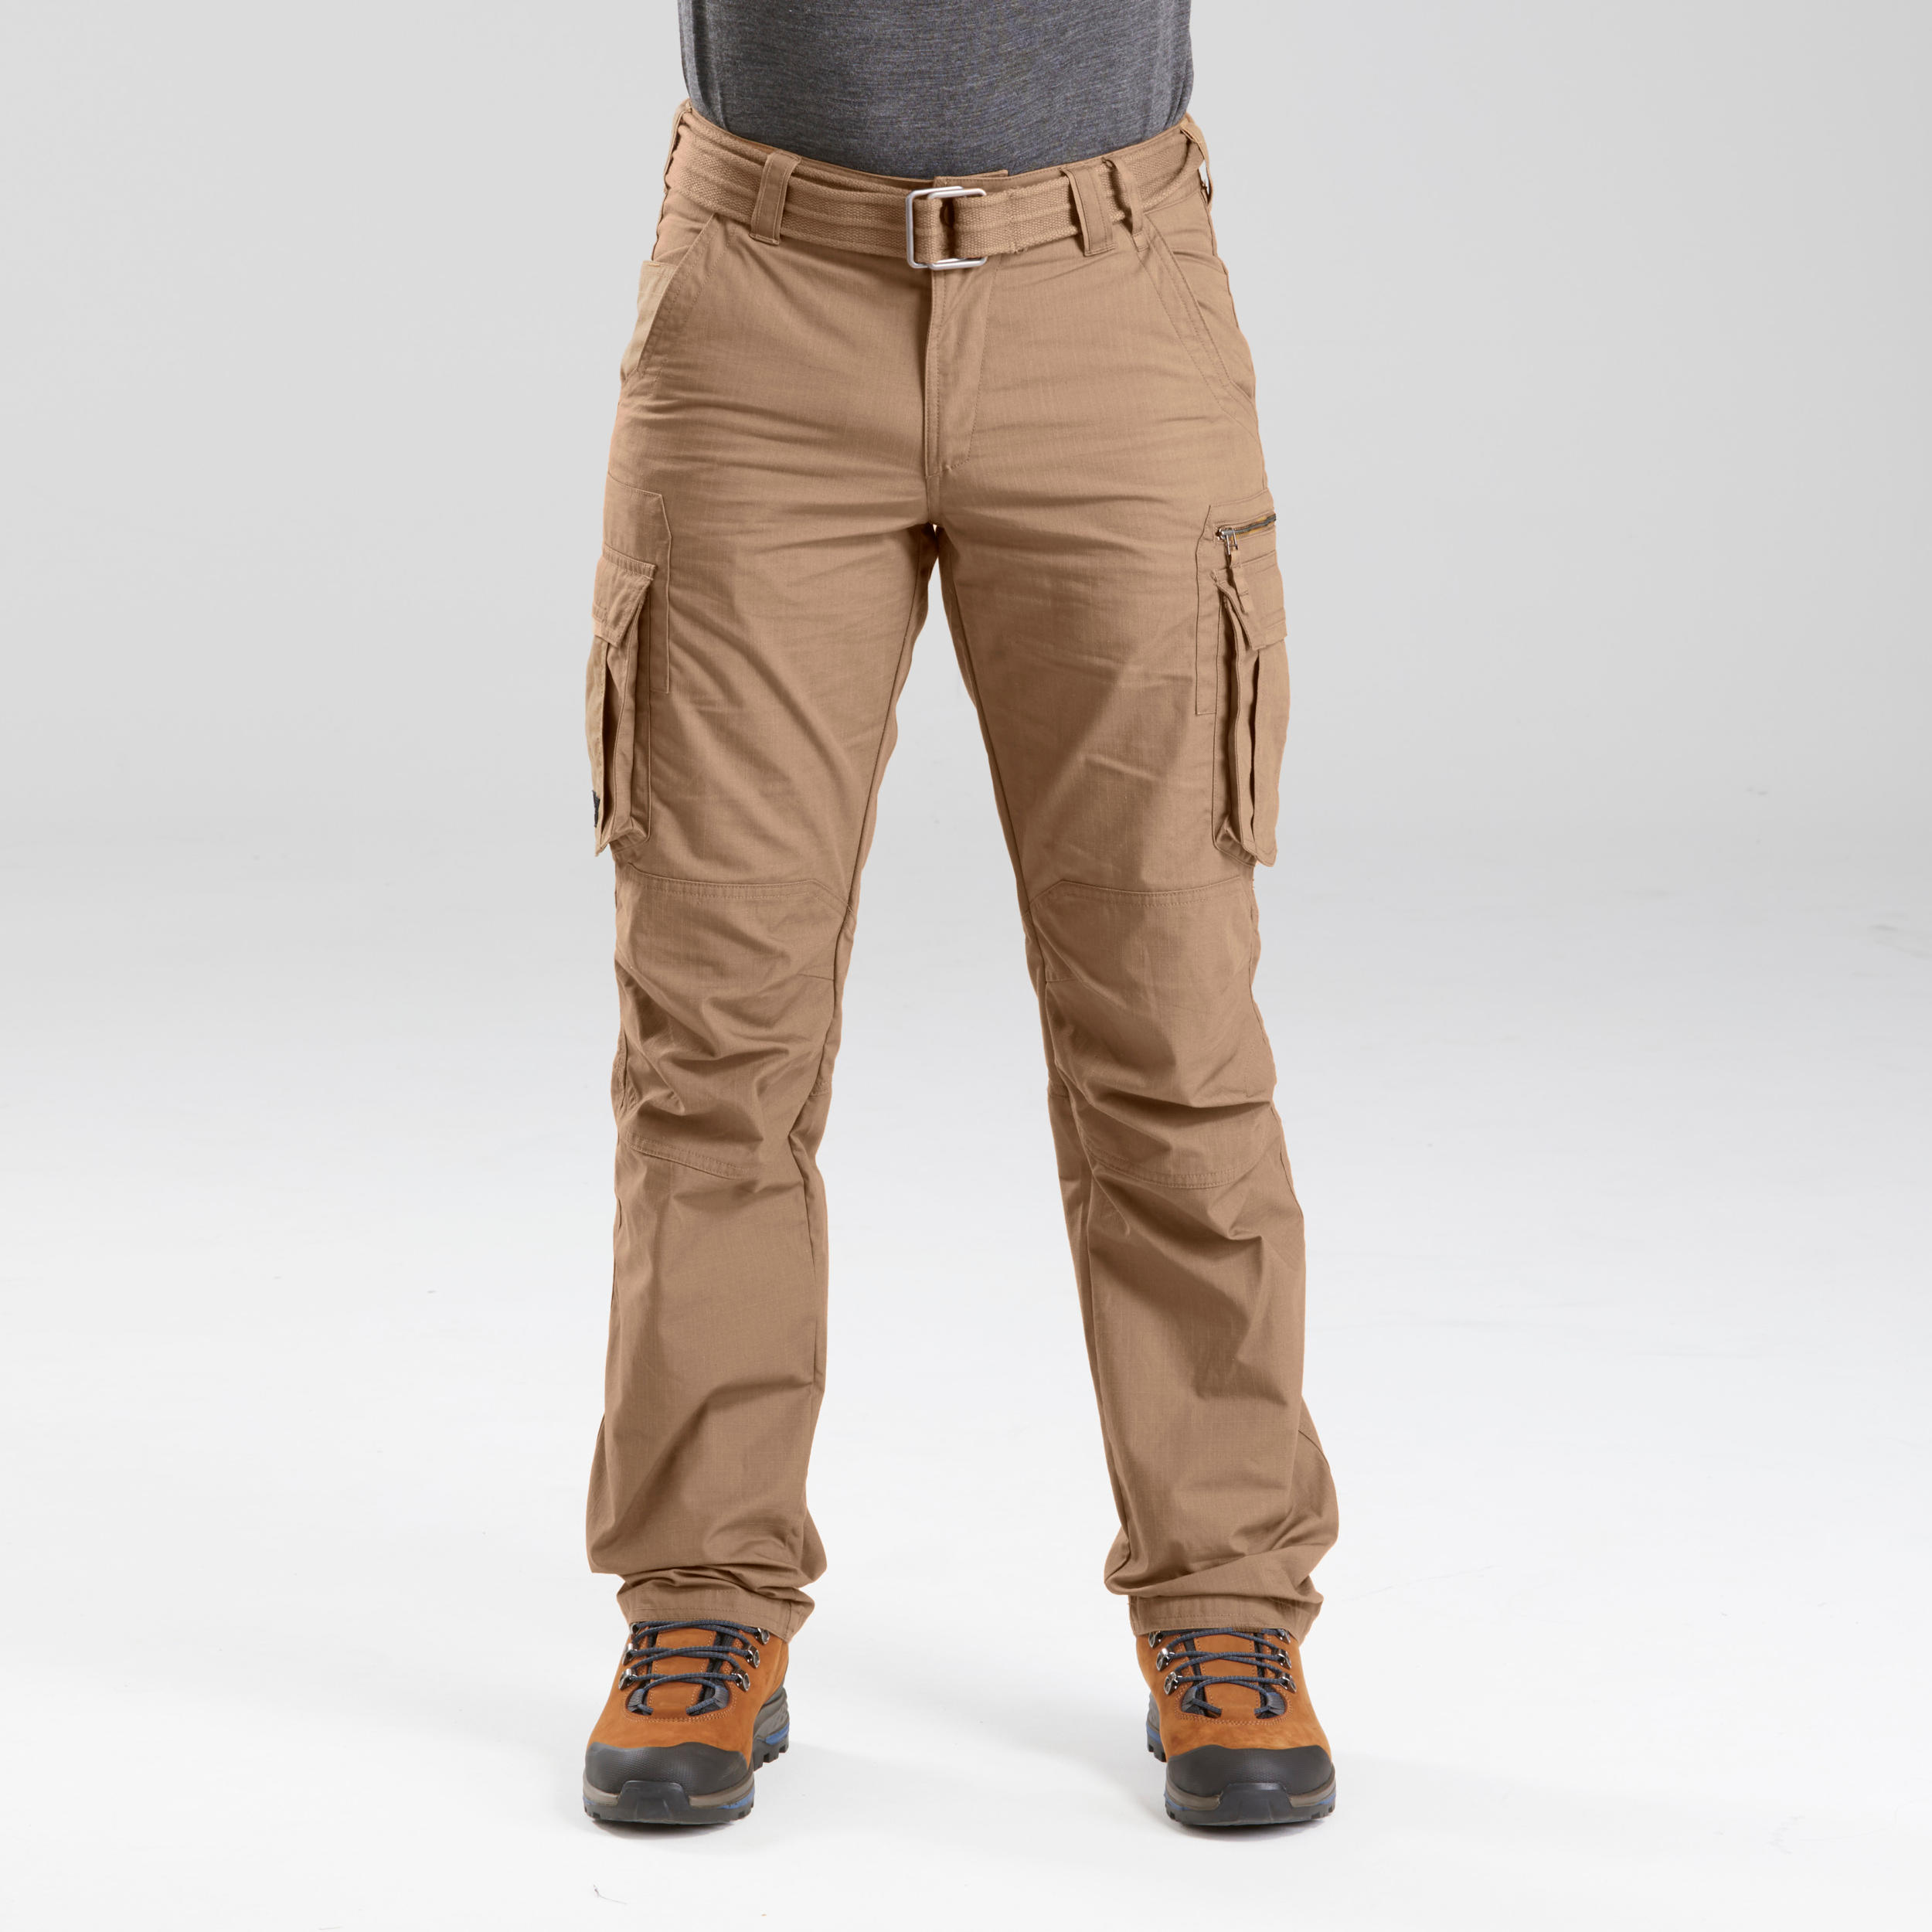 Formal Trouser and Executive Fit Formal Trouser Manufacturer  D Code  Trousers Mumbai